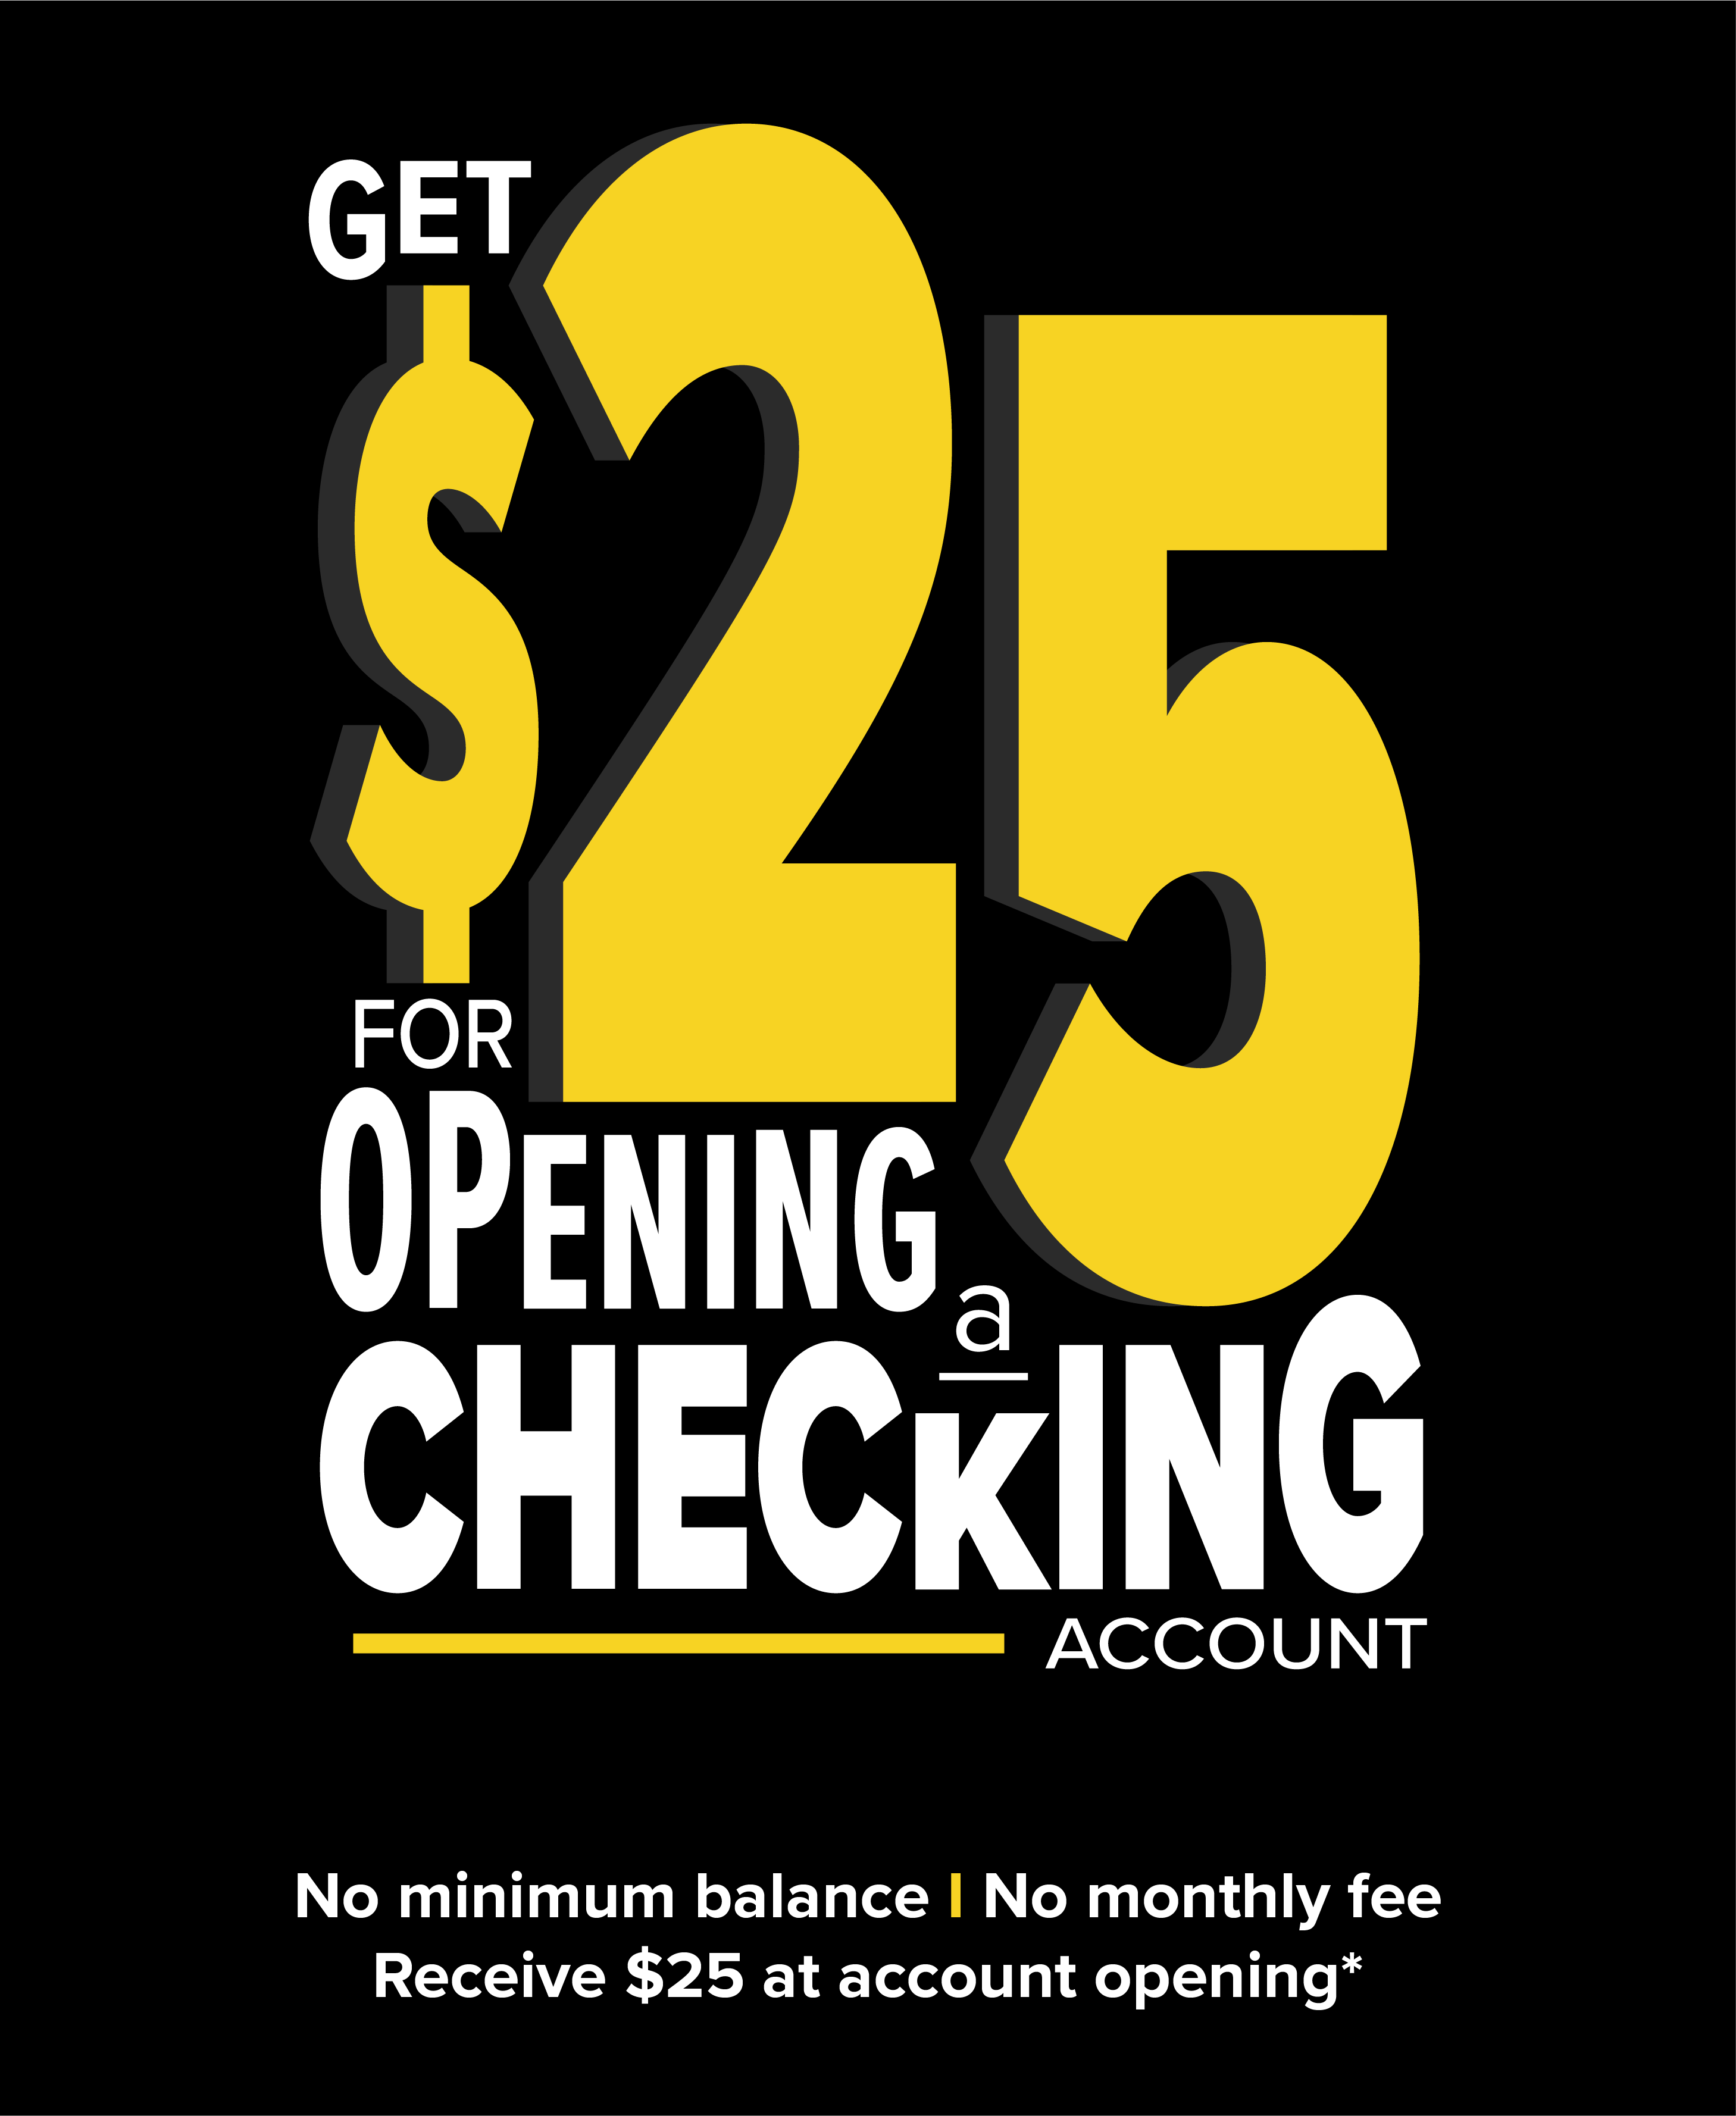 Get $25 for opening a checking account